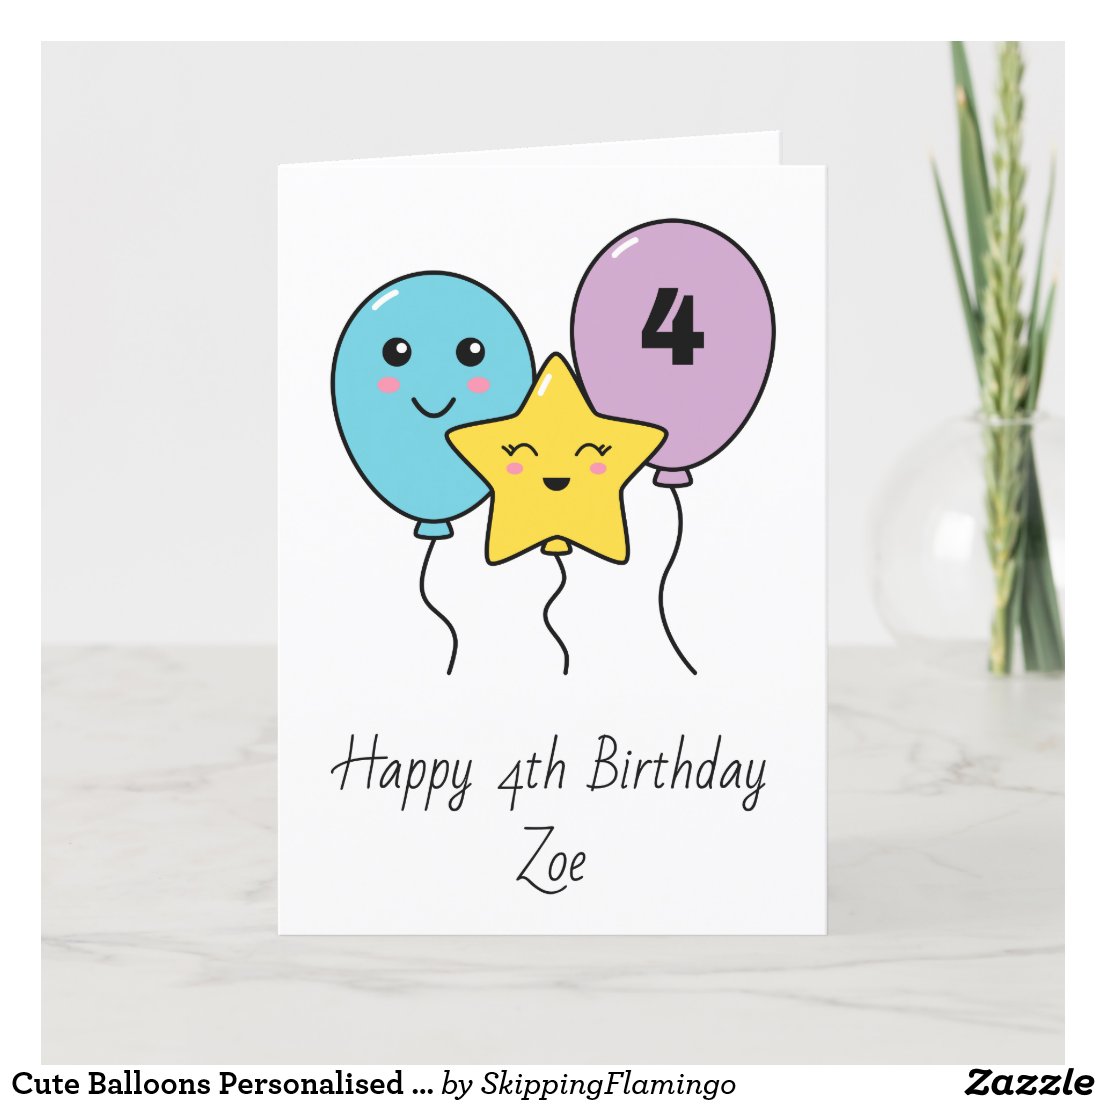 Cute Balloons Personalized 4th Birthday Card